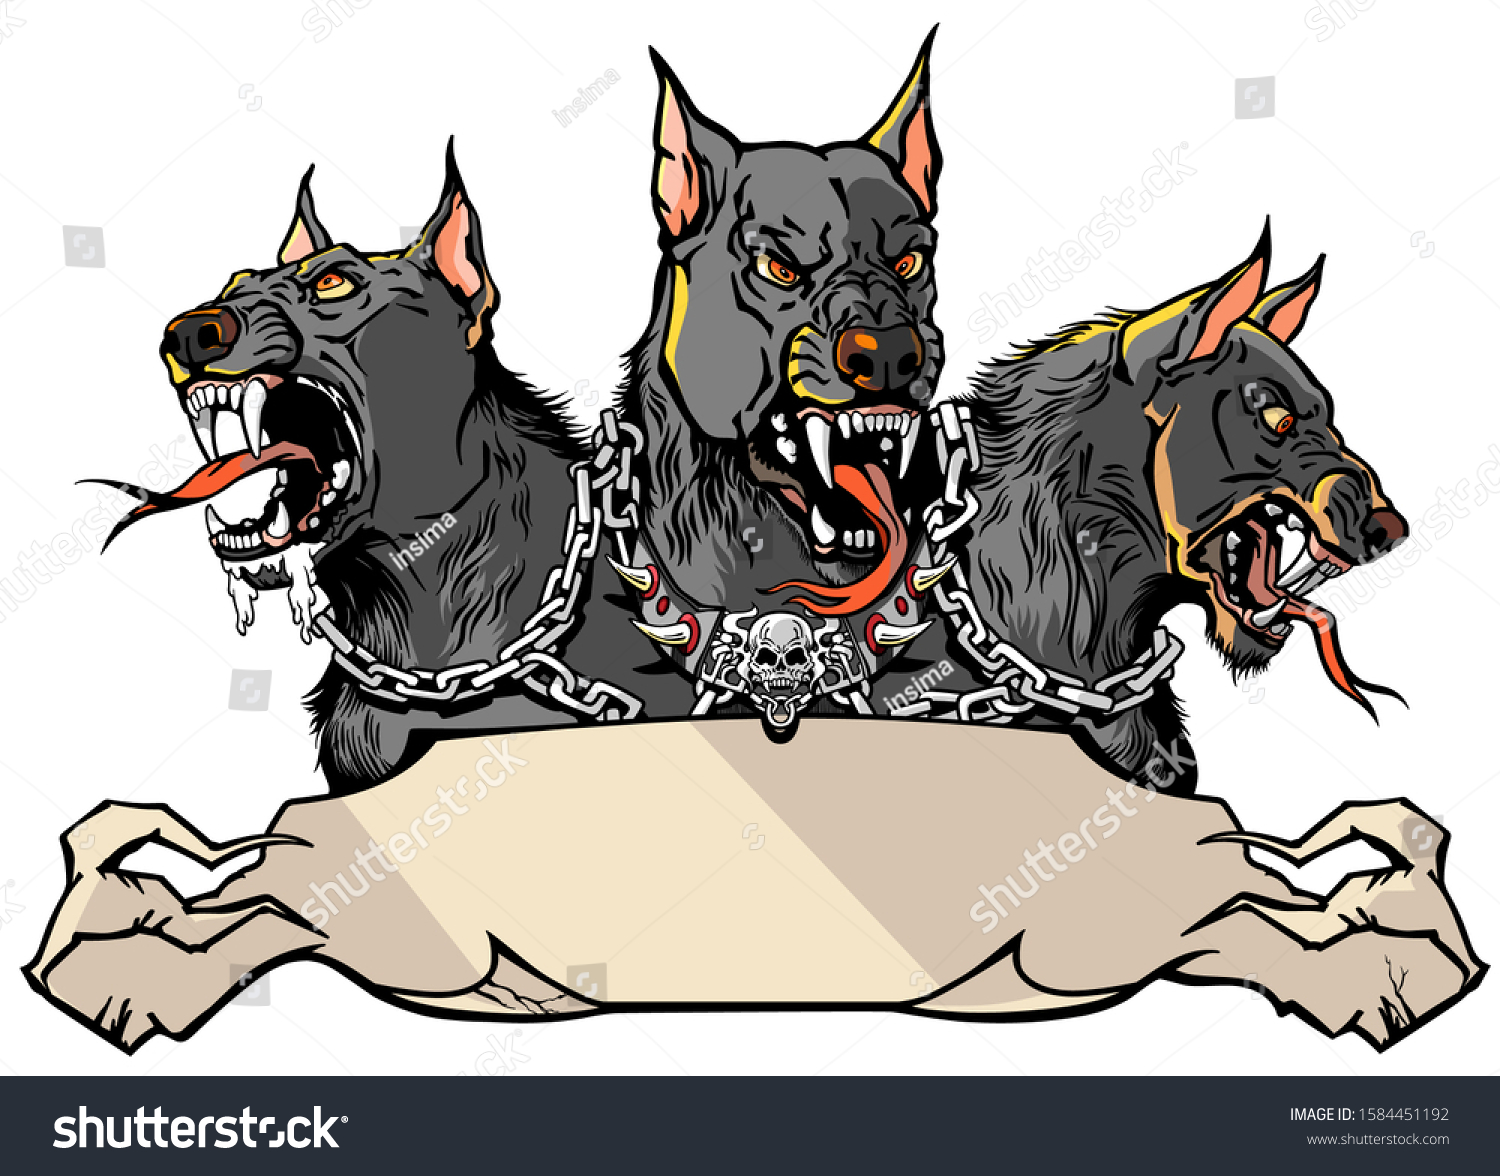 SVG of Cerberus supernatural hound of Hell. Mythological three headed dog the guard of entrance to hell. Hound of Hades. Logo, banner, emblem with ribbon scroll. Shirt design template. Graphic style vector svg